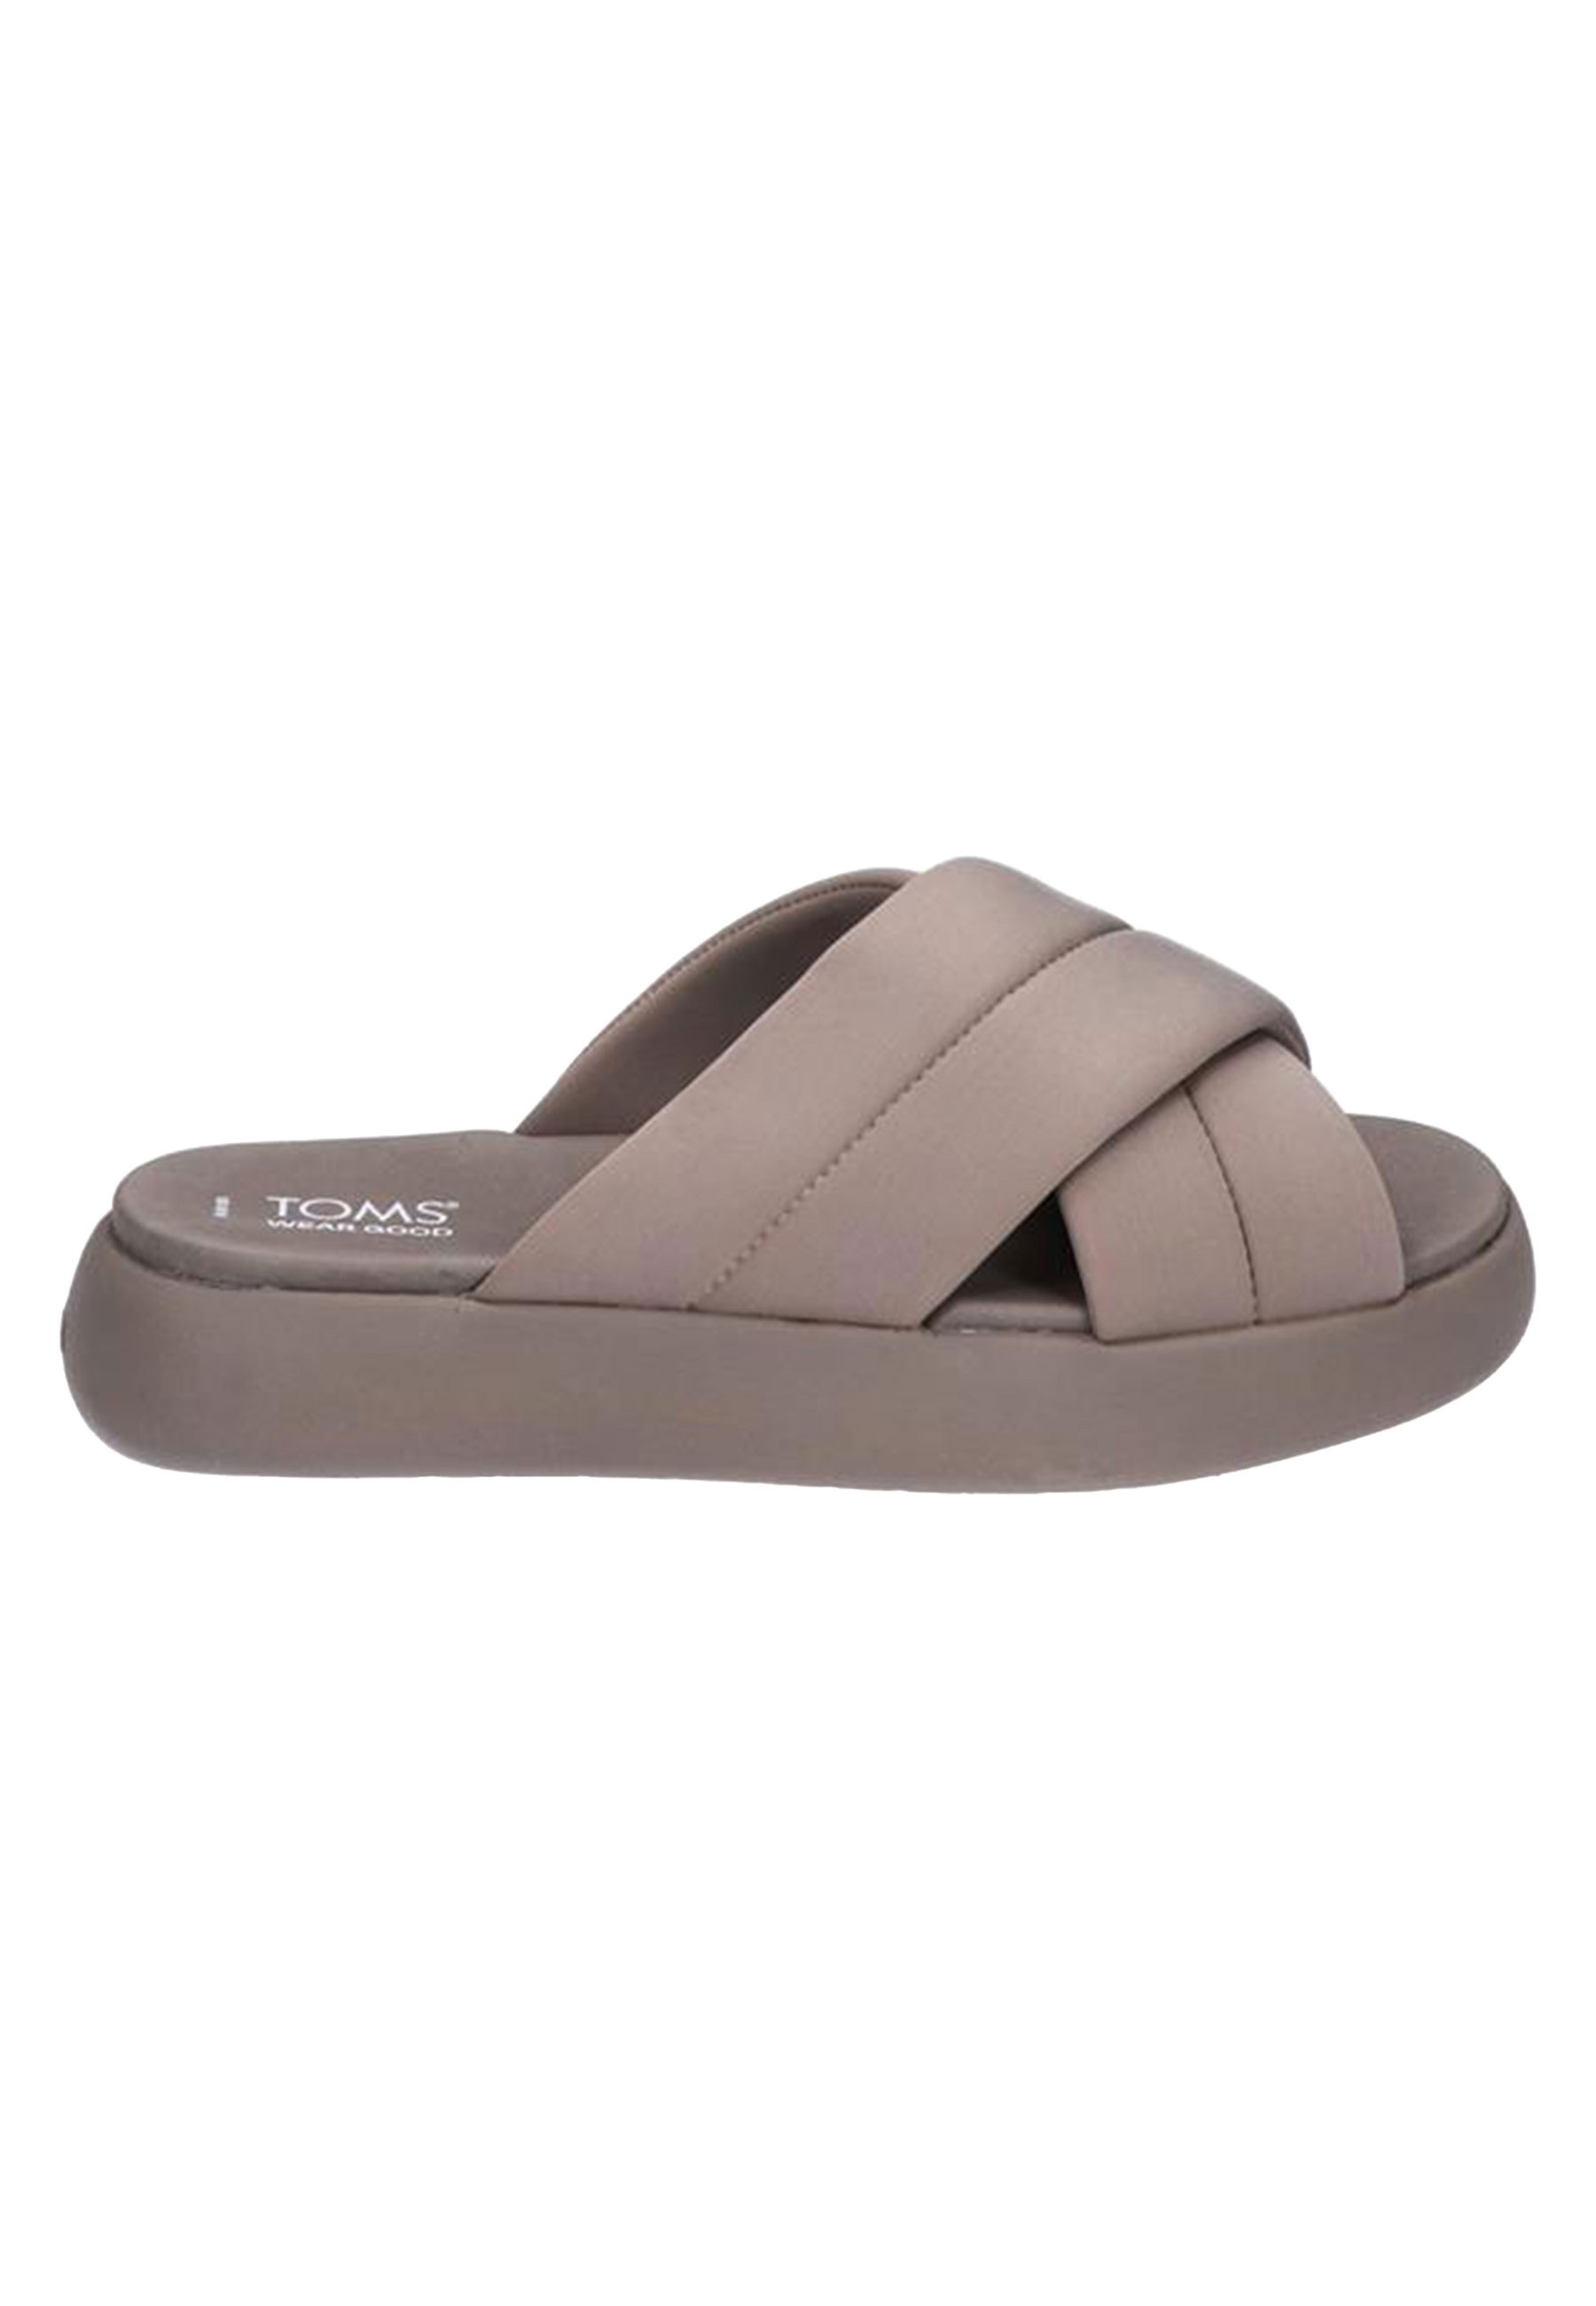 Toms Taupe Alpargata mallow crossover slippers taupe